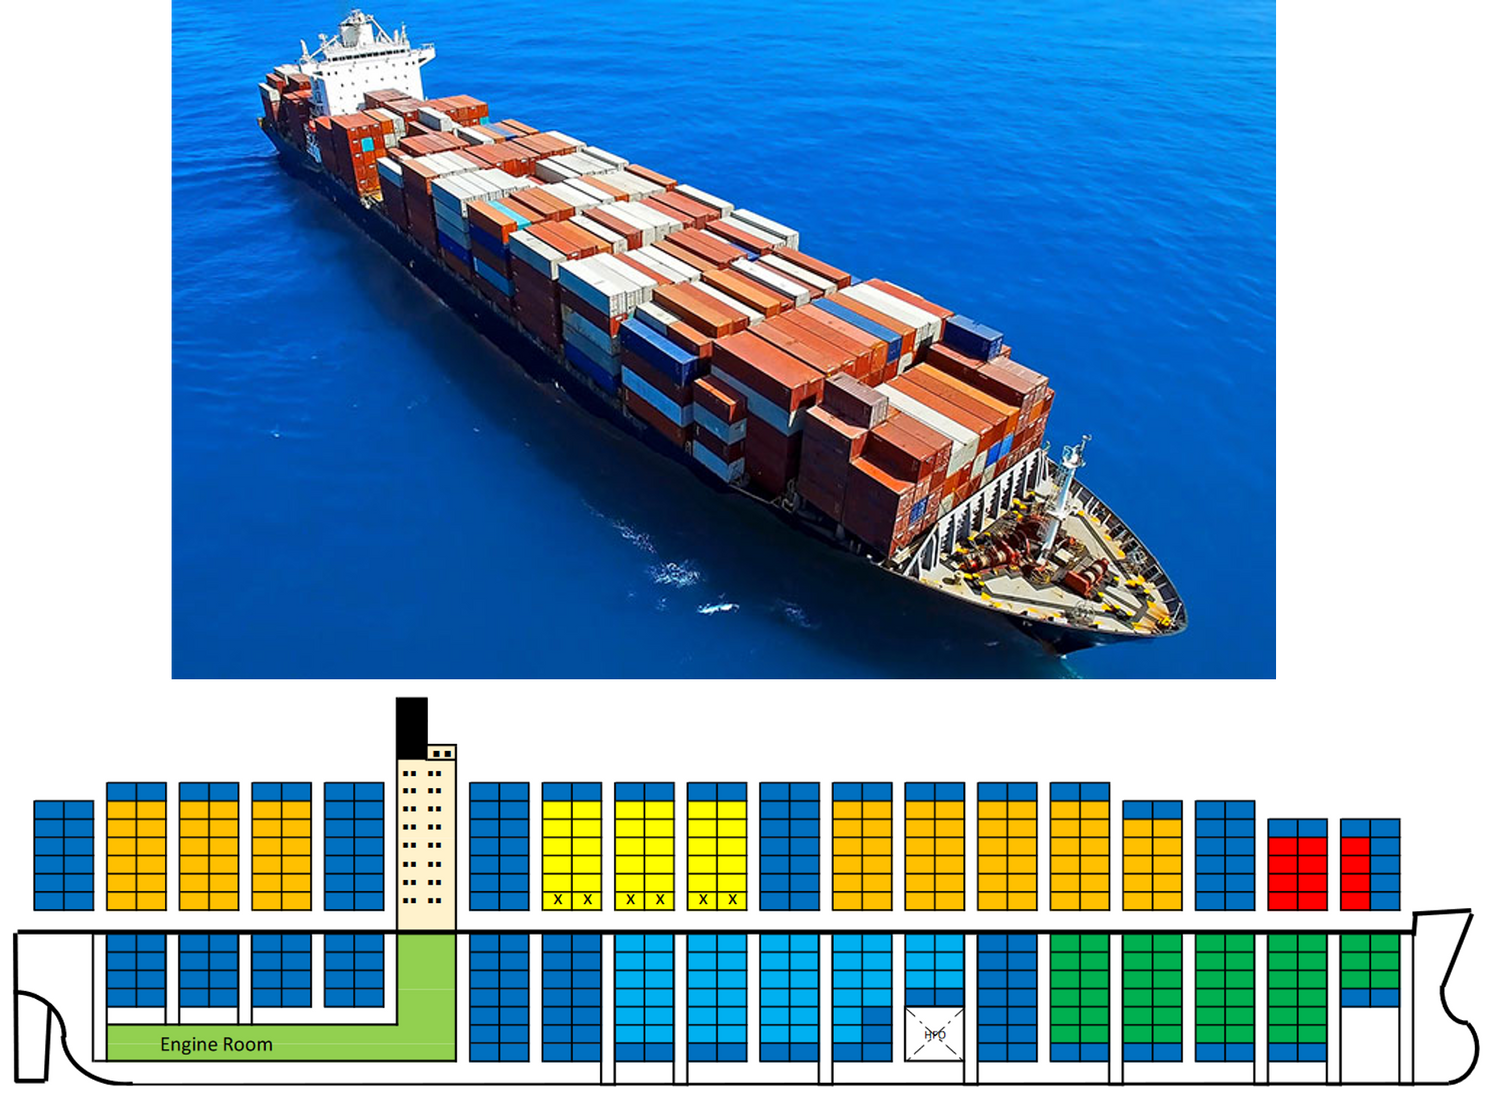 PANAMAX and Post PANAMAX Container Ship (3,000 to 11,000 TEU):